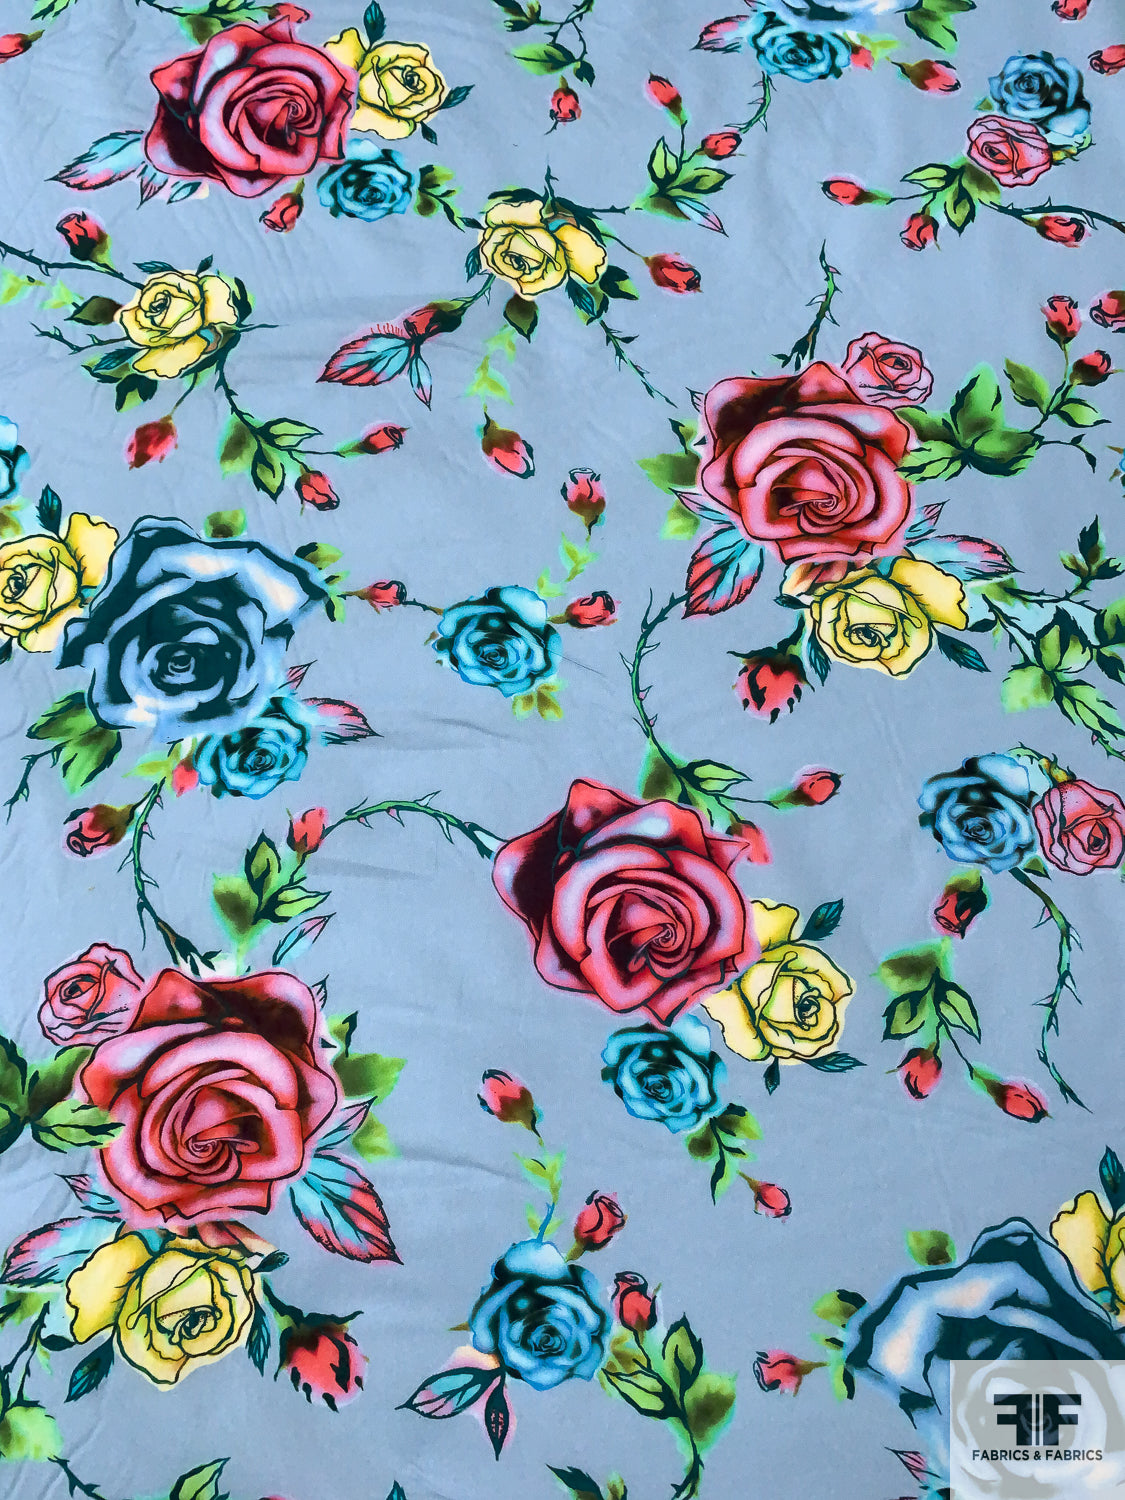 Print Cotton Fabric Designer Fabric Floral Printed Patterned 